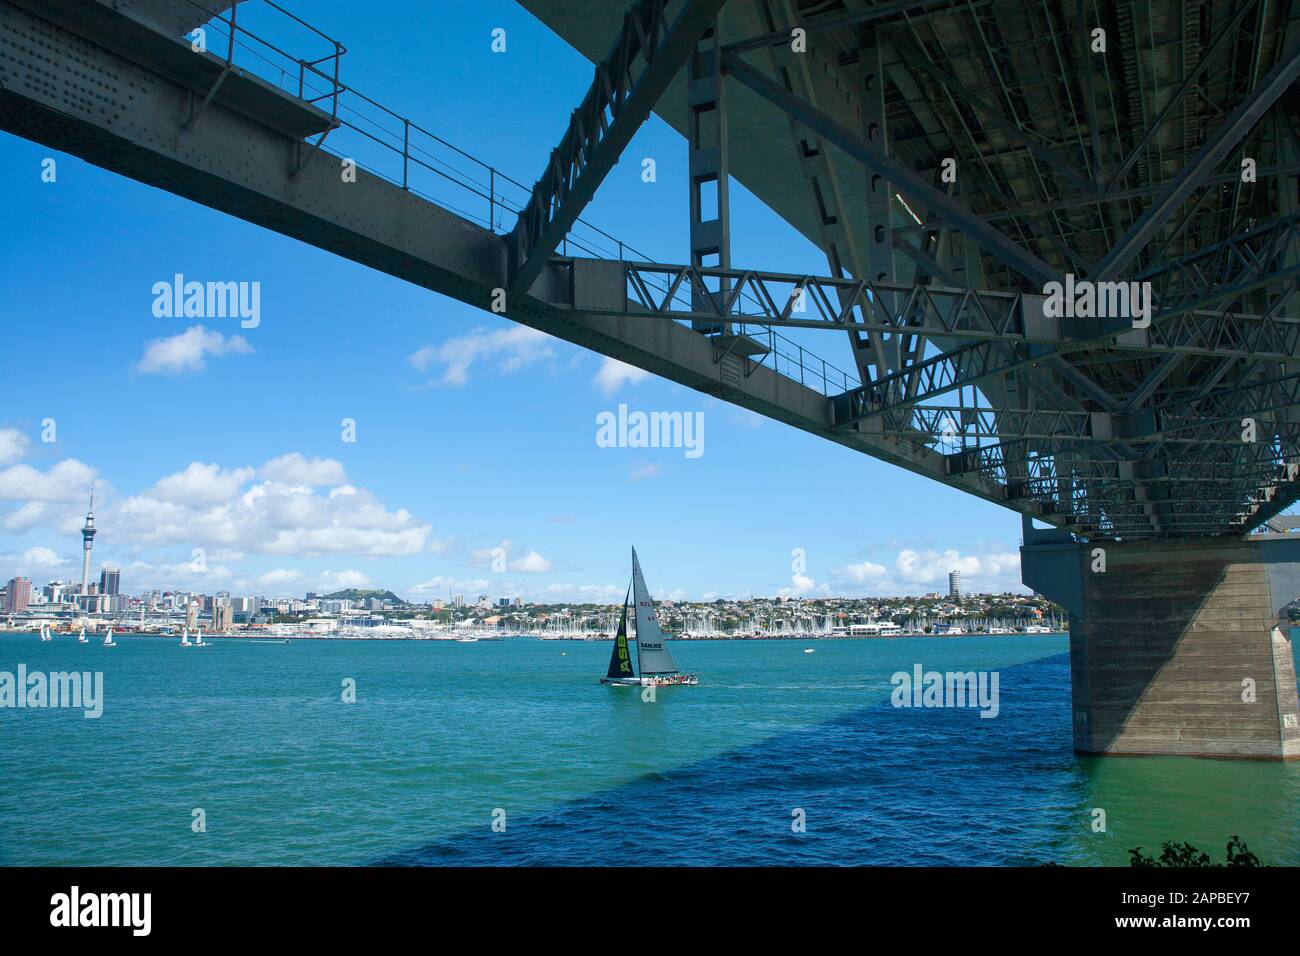 Looking over Waitemata Harbour at downtown Auckland city from the North Shore with the underside of the Harbour Bridge in foreground. New Zealand. Stock Photo